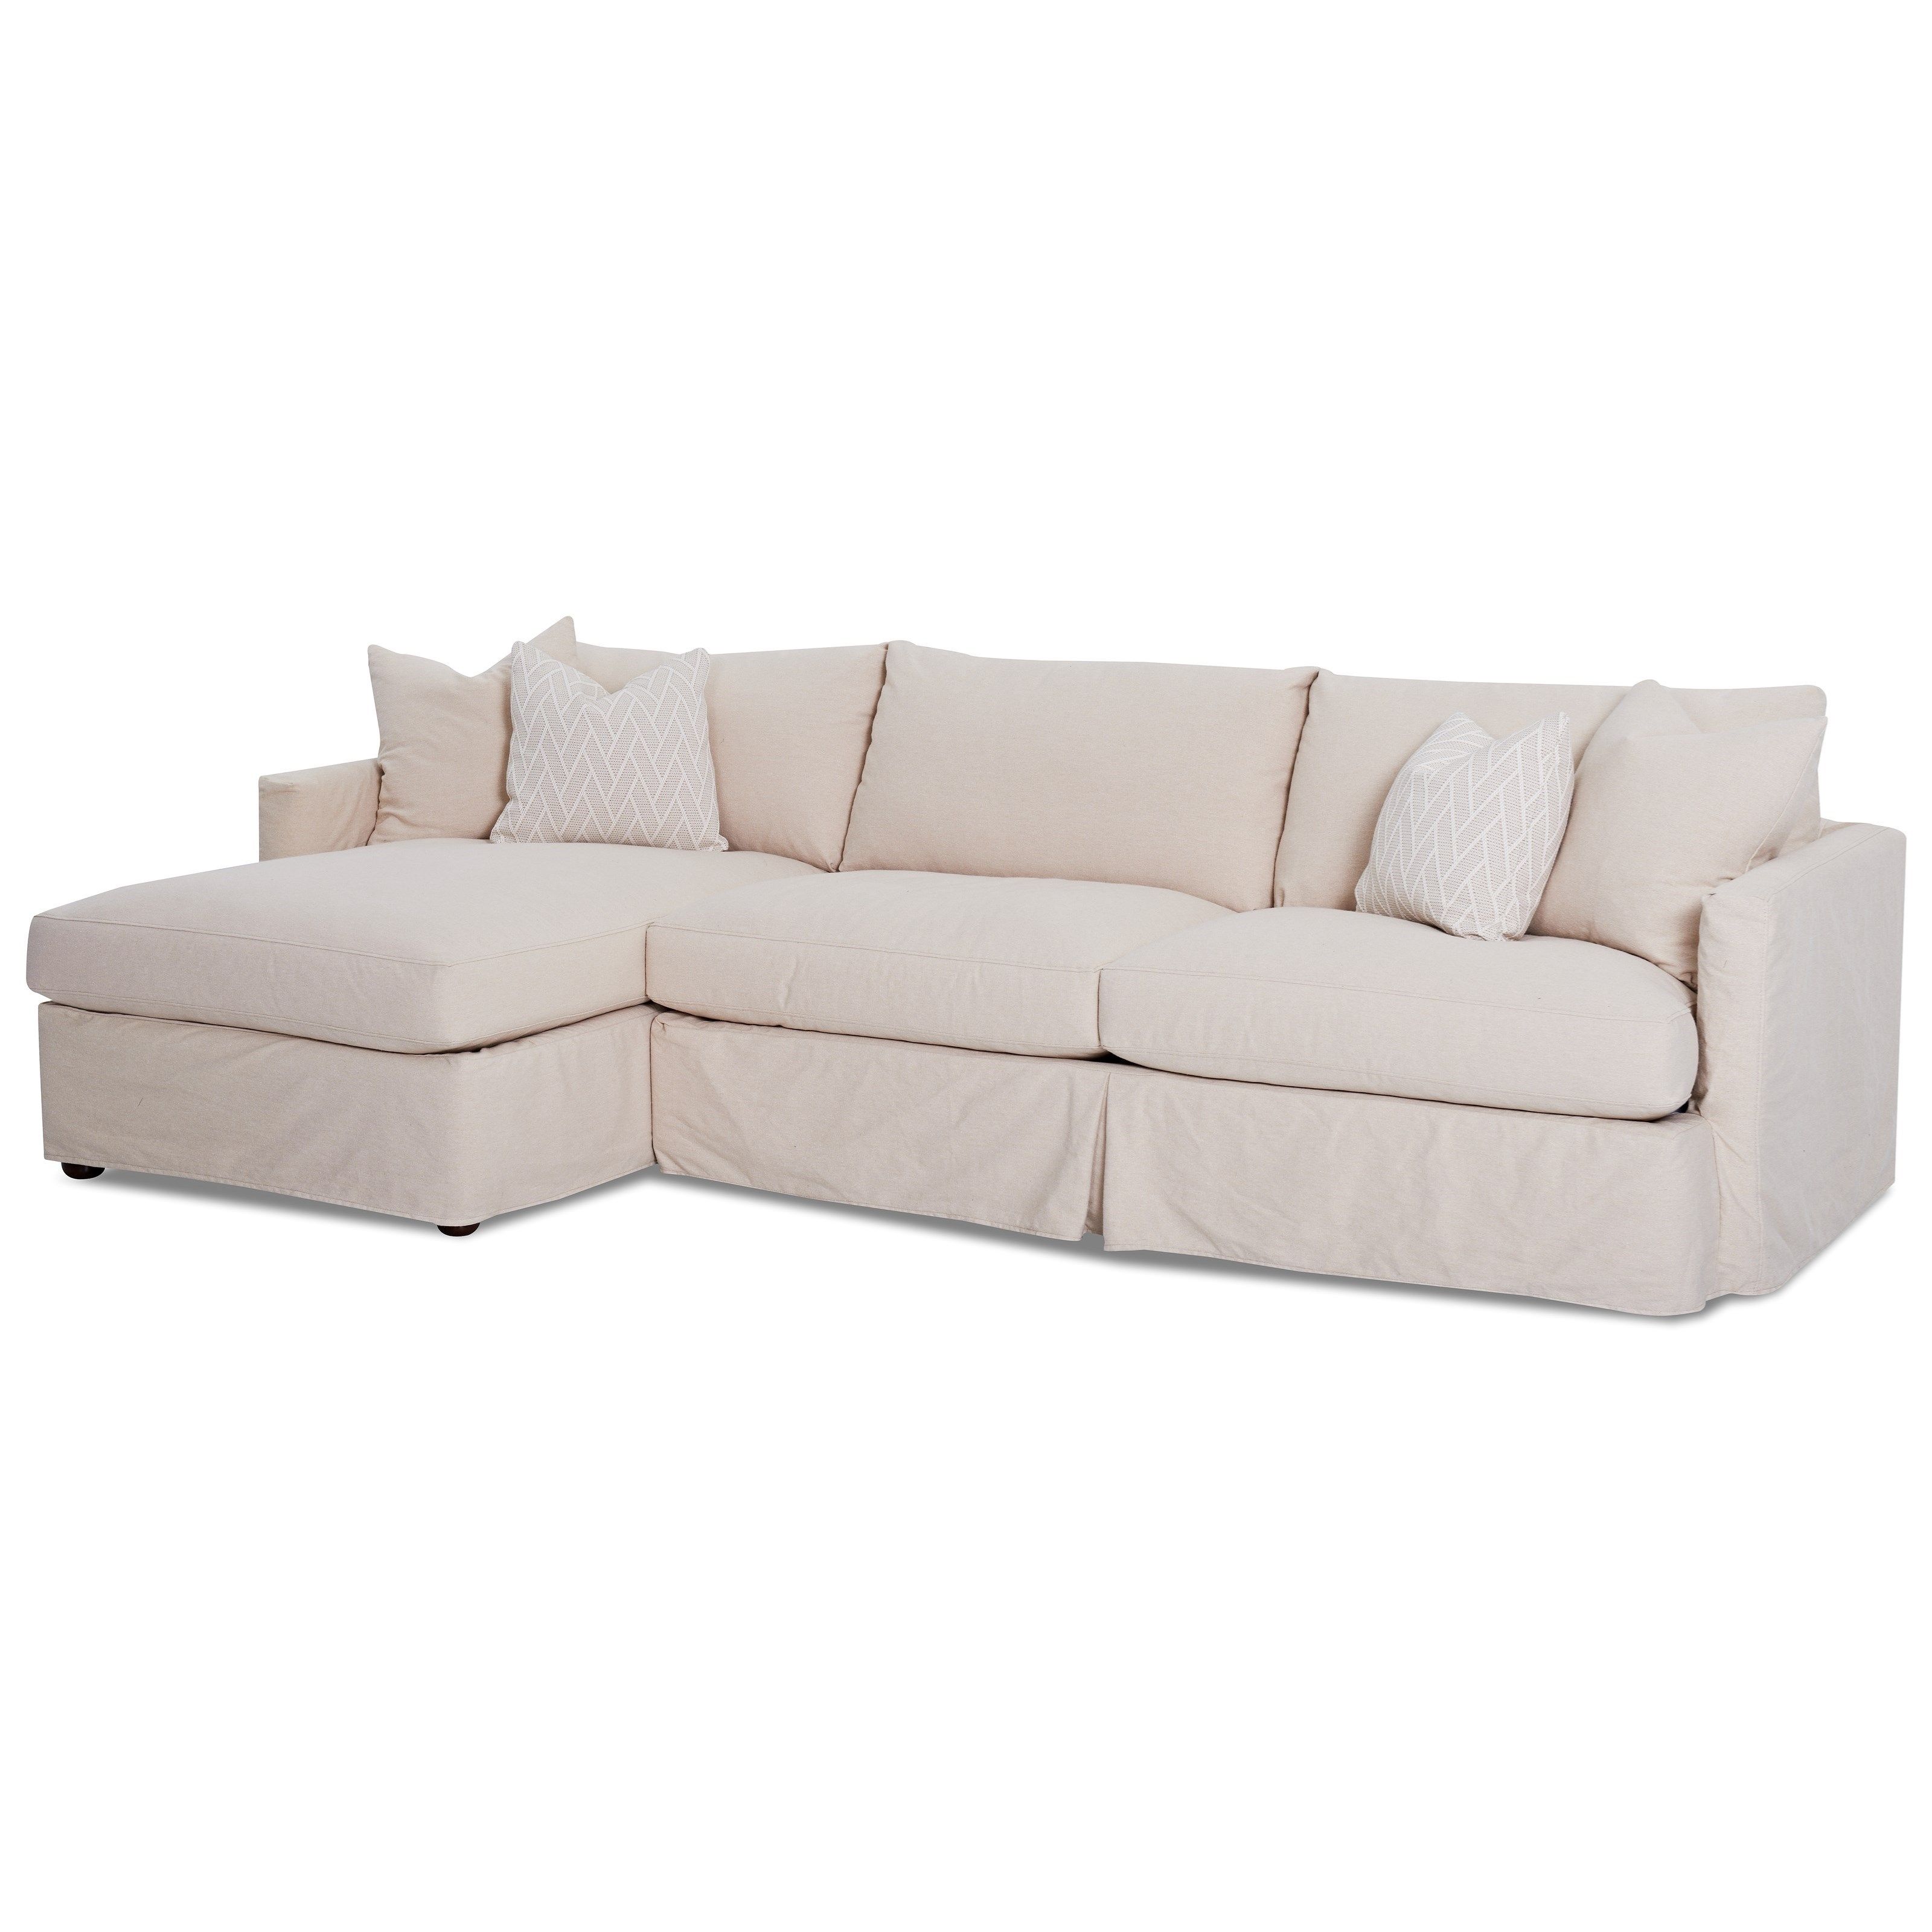 Laf Chaise Sectional Sofa | Baci Living Room Regarding Malbry Point 3 Piece Sectionals With Raf Chaise (View 14 of 30)